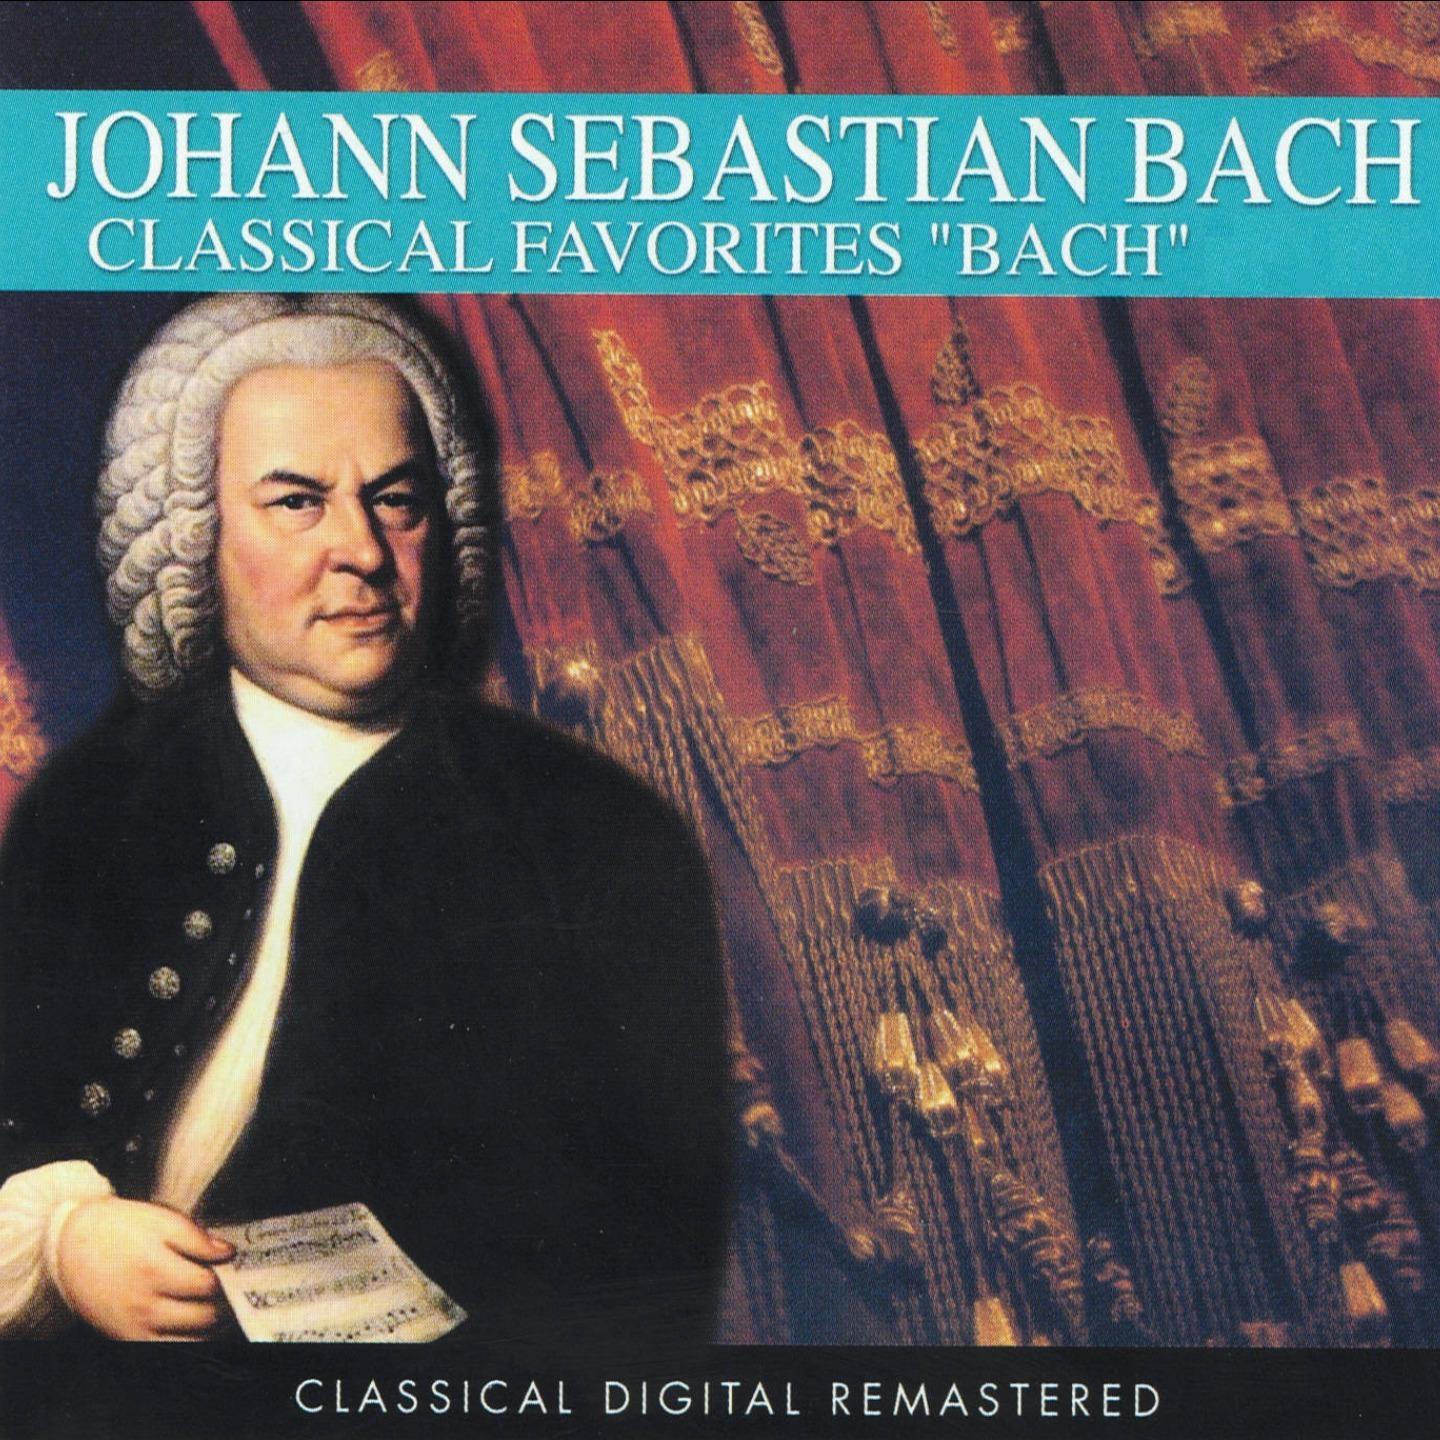 Suite for Orchestra No. 3, in D Major, BWV 1068: Air